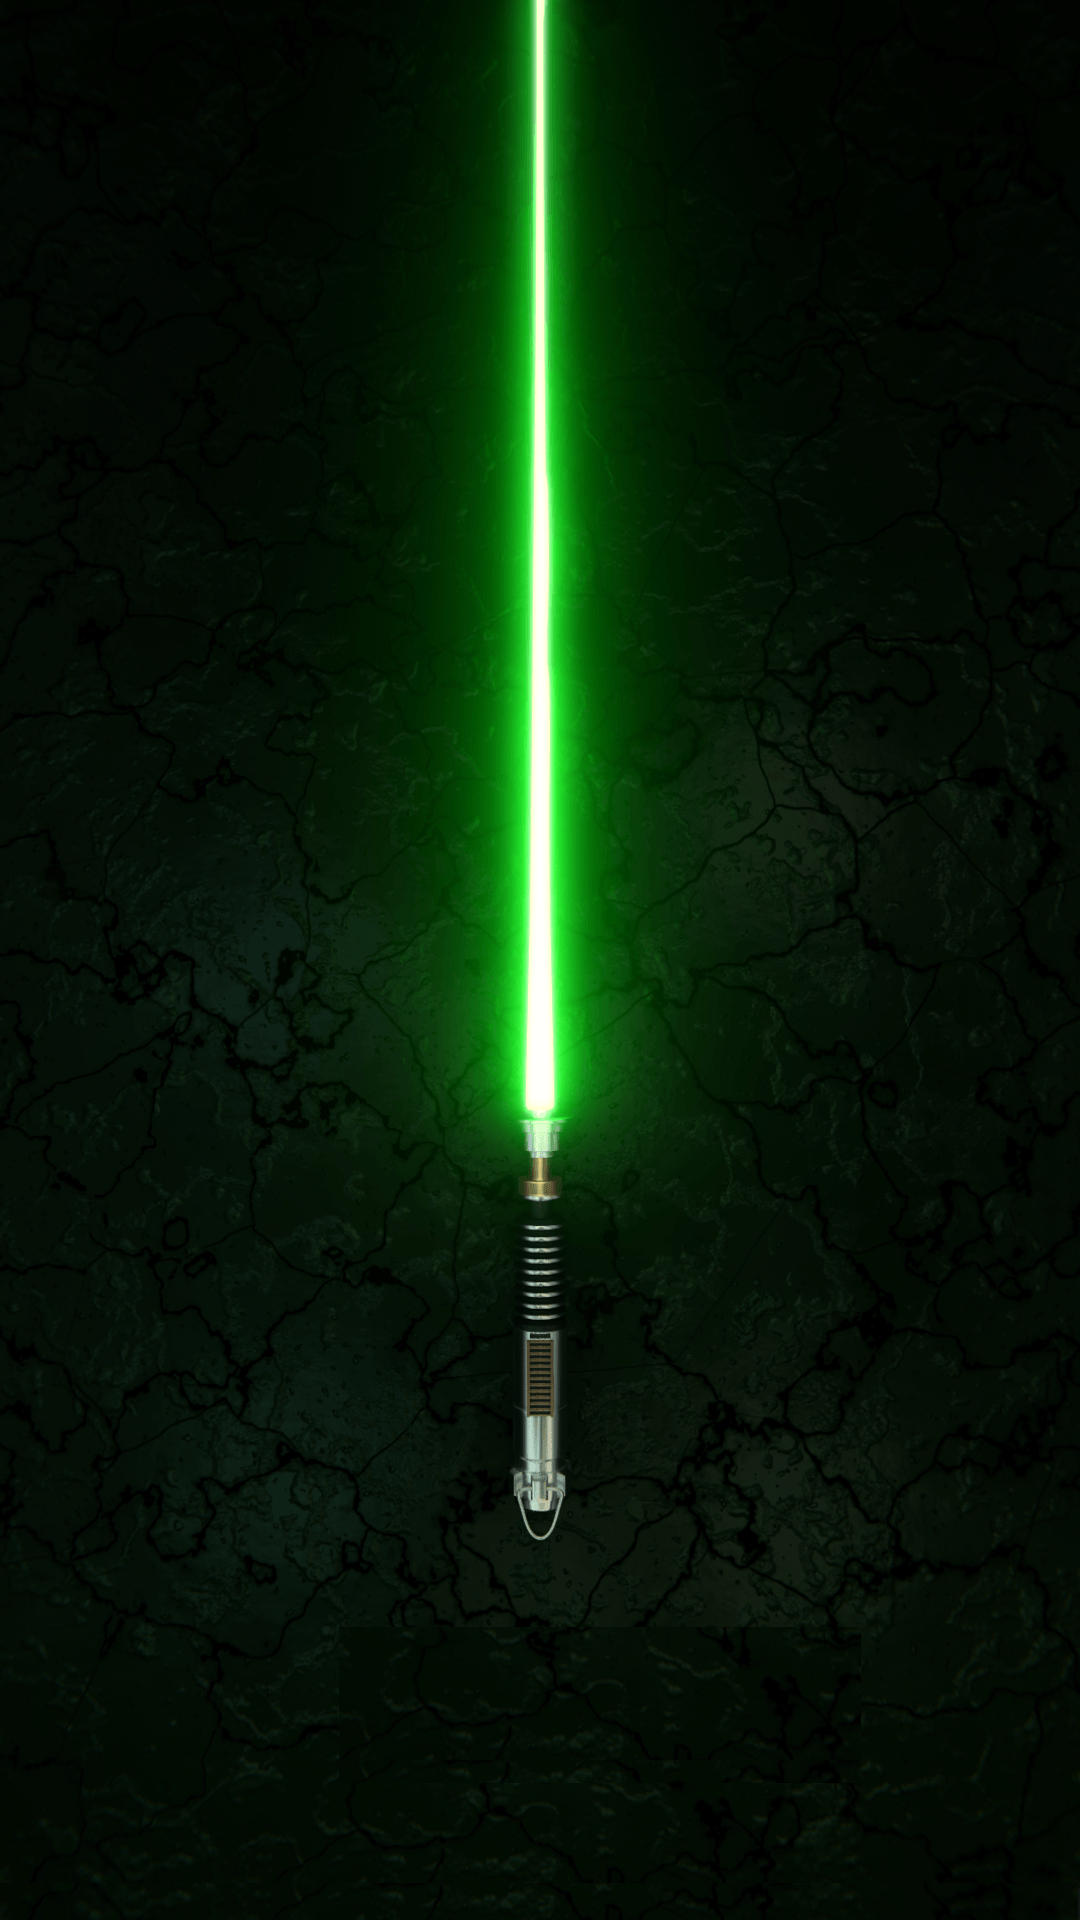 Star Wars Lightsaber to see more exciting Star Wars wallpaper